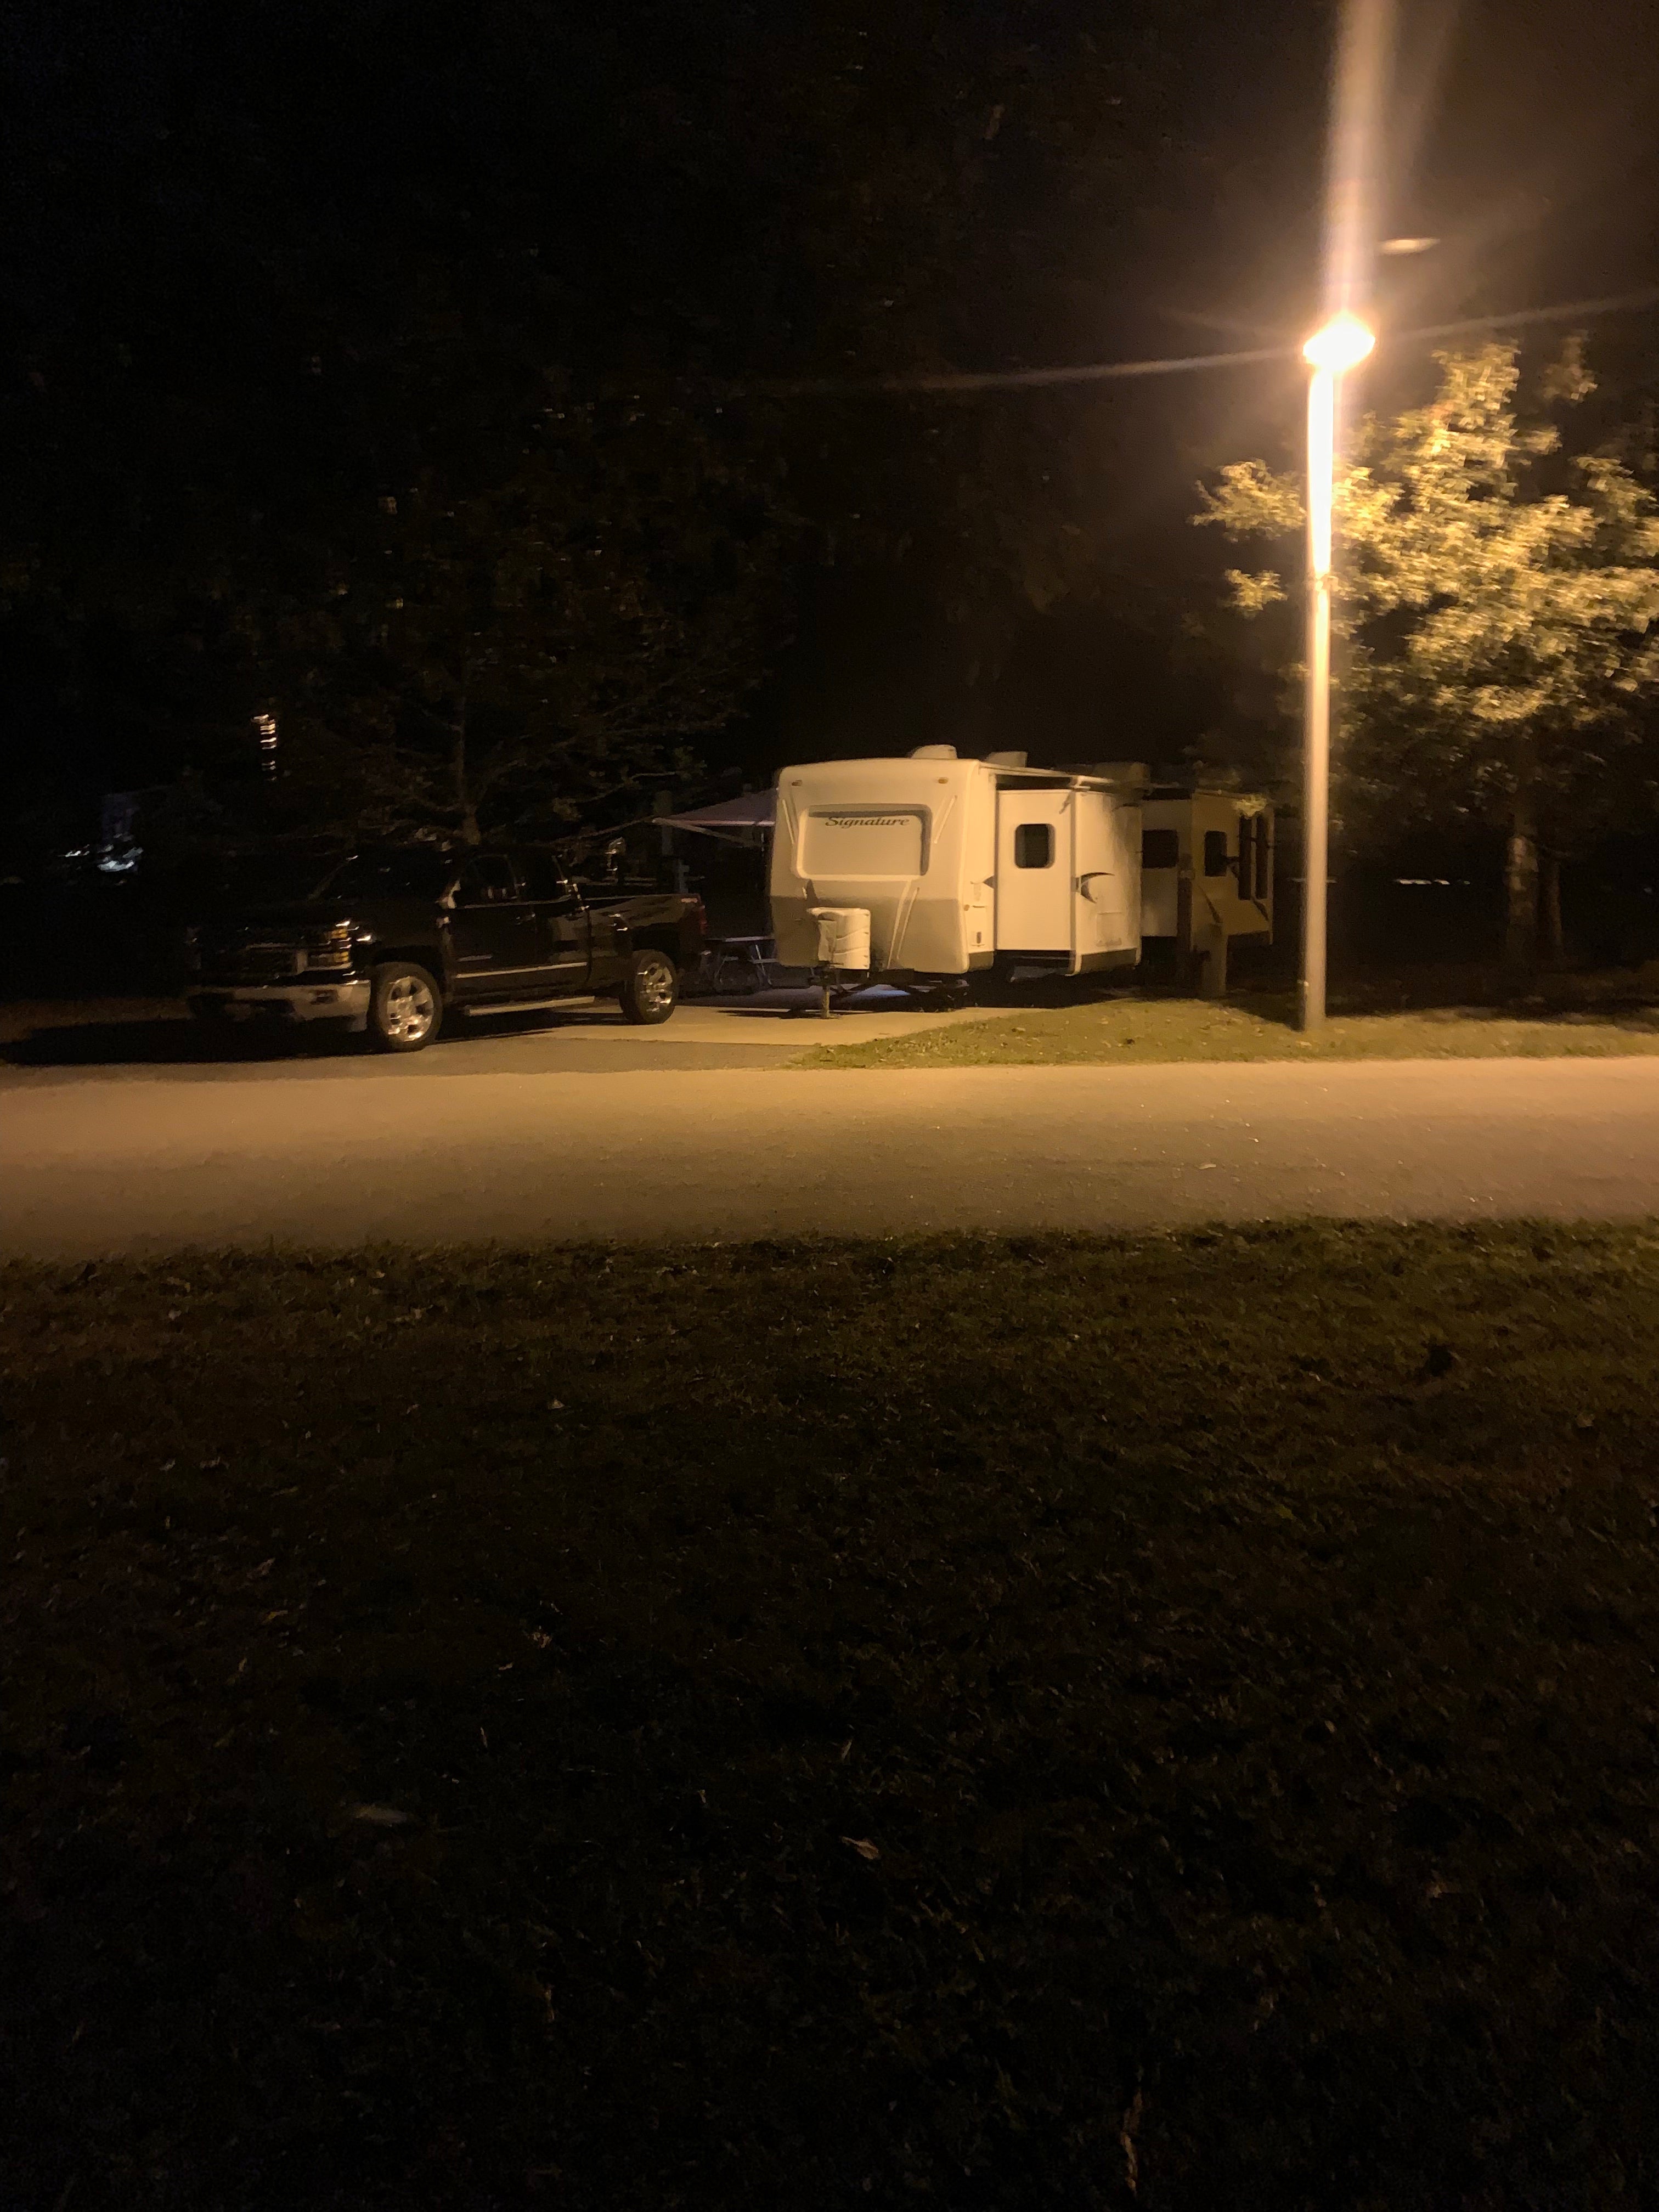 We were camping in between another travel trailer and an RV. You can’t see either of them in the picture, that’s how big the sites are!